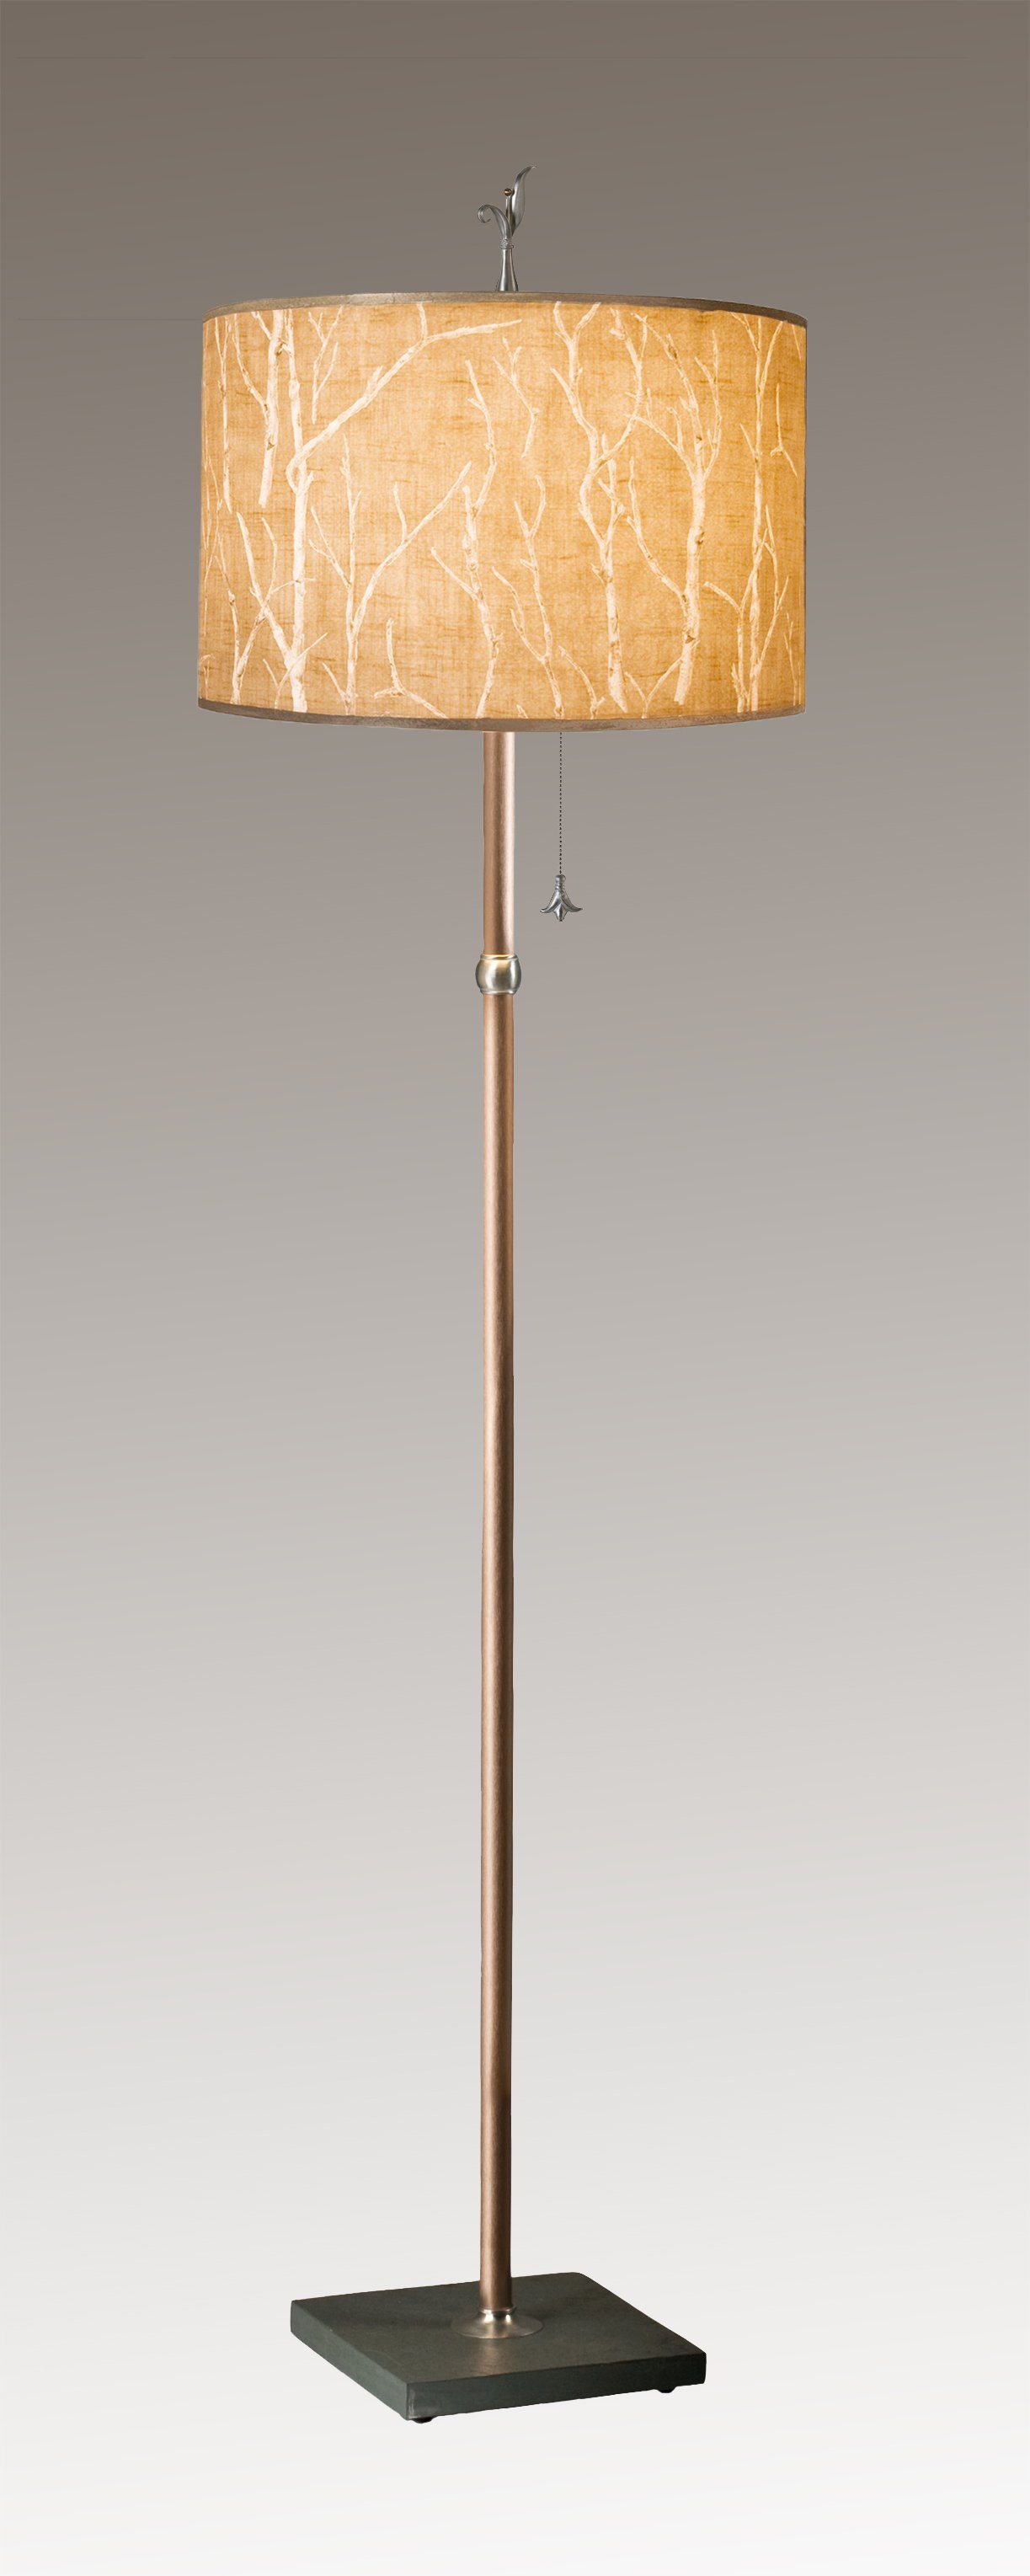 Janna Ugone & Co Floor Lamps Copper Floor Lamp with Large Drum Shade in Twigs